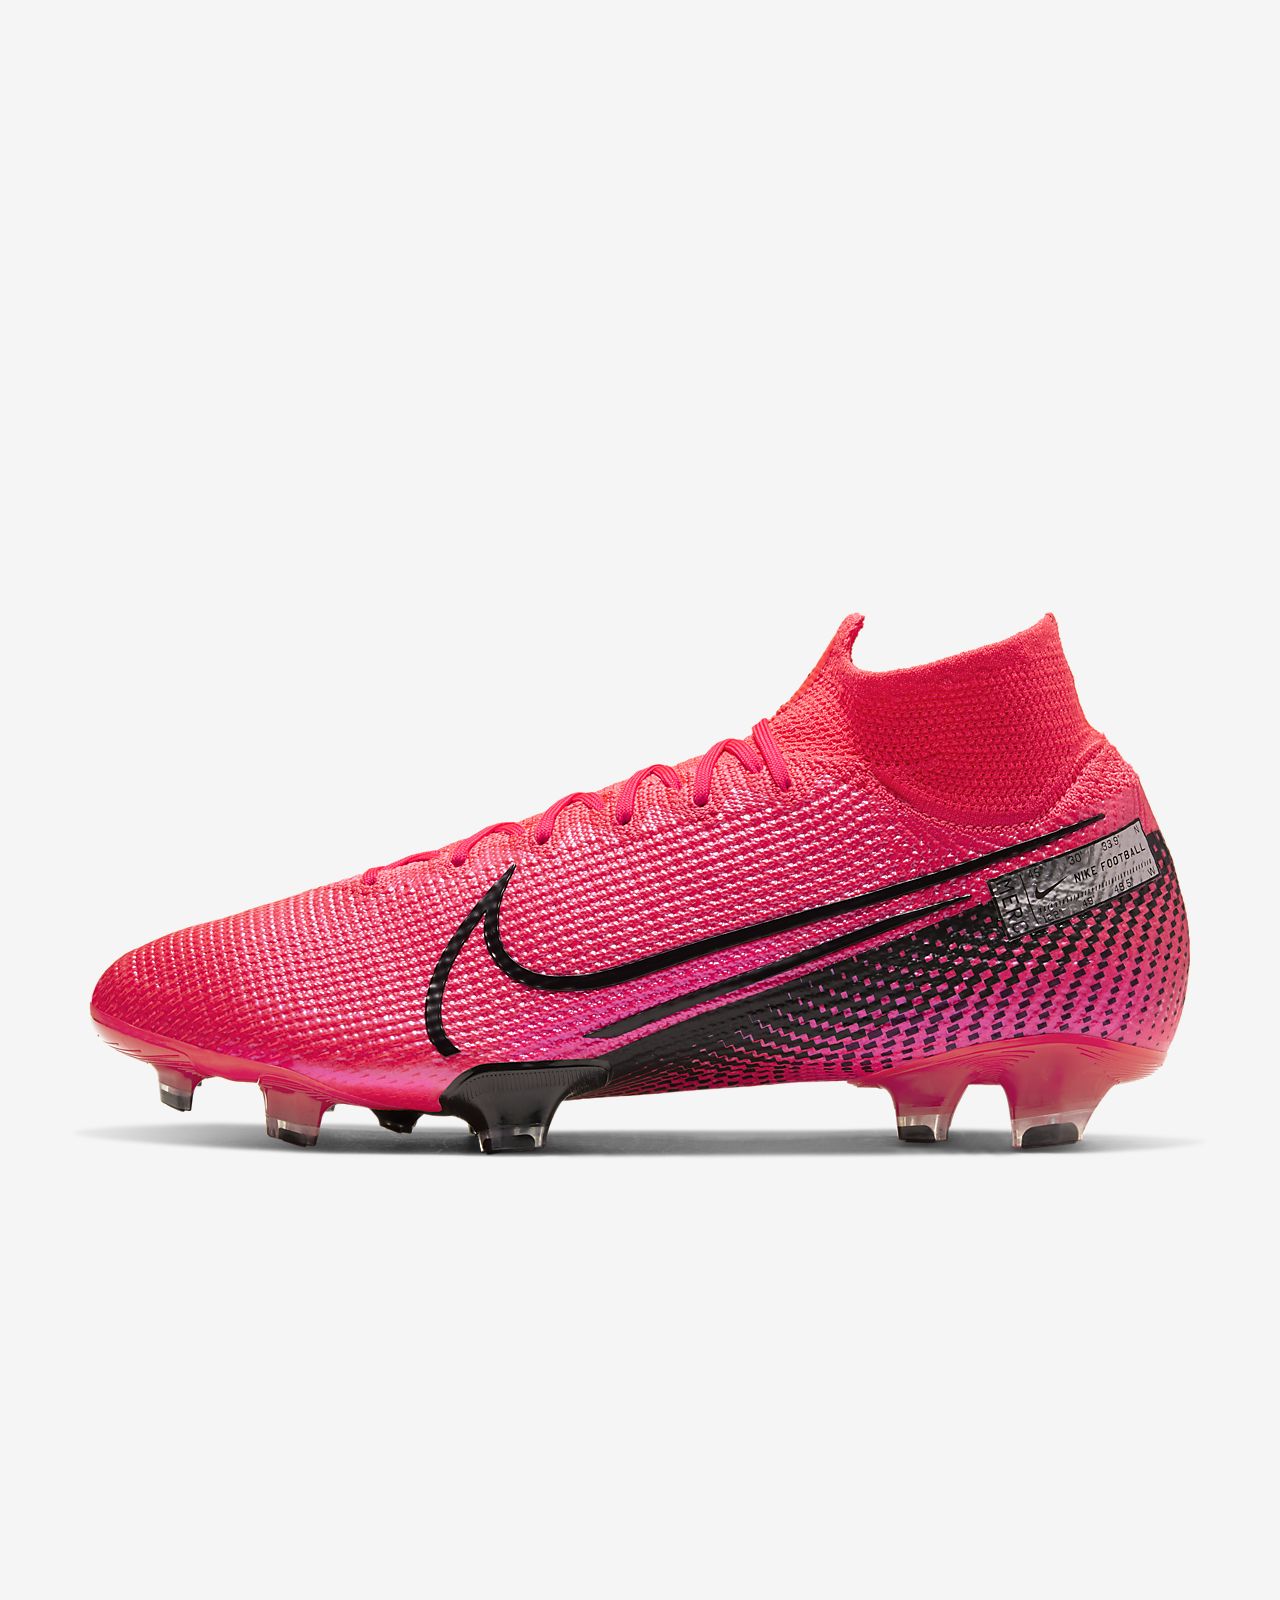 Nike Mercurial Superfly 7 Elite FG Firm Ground.